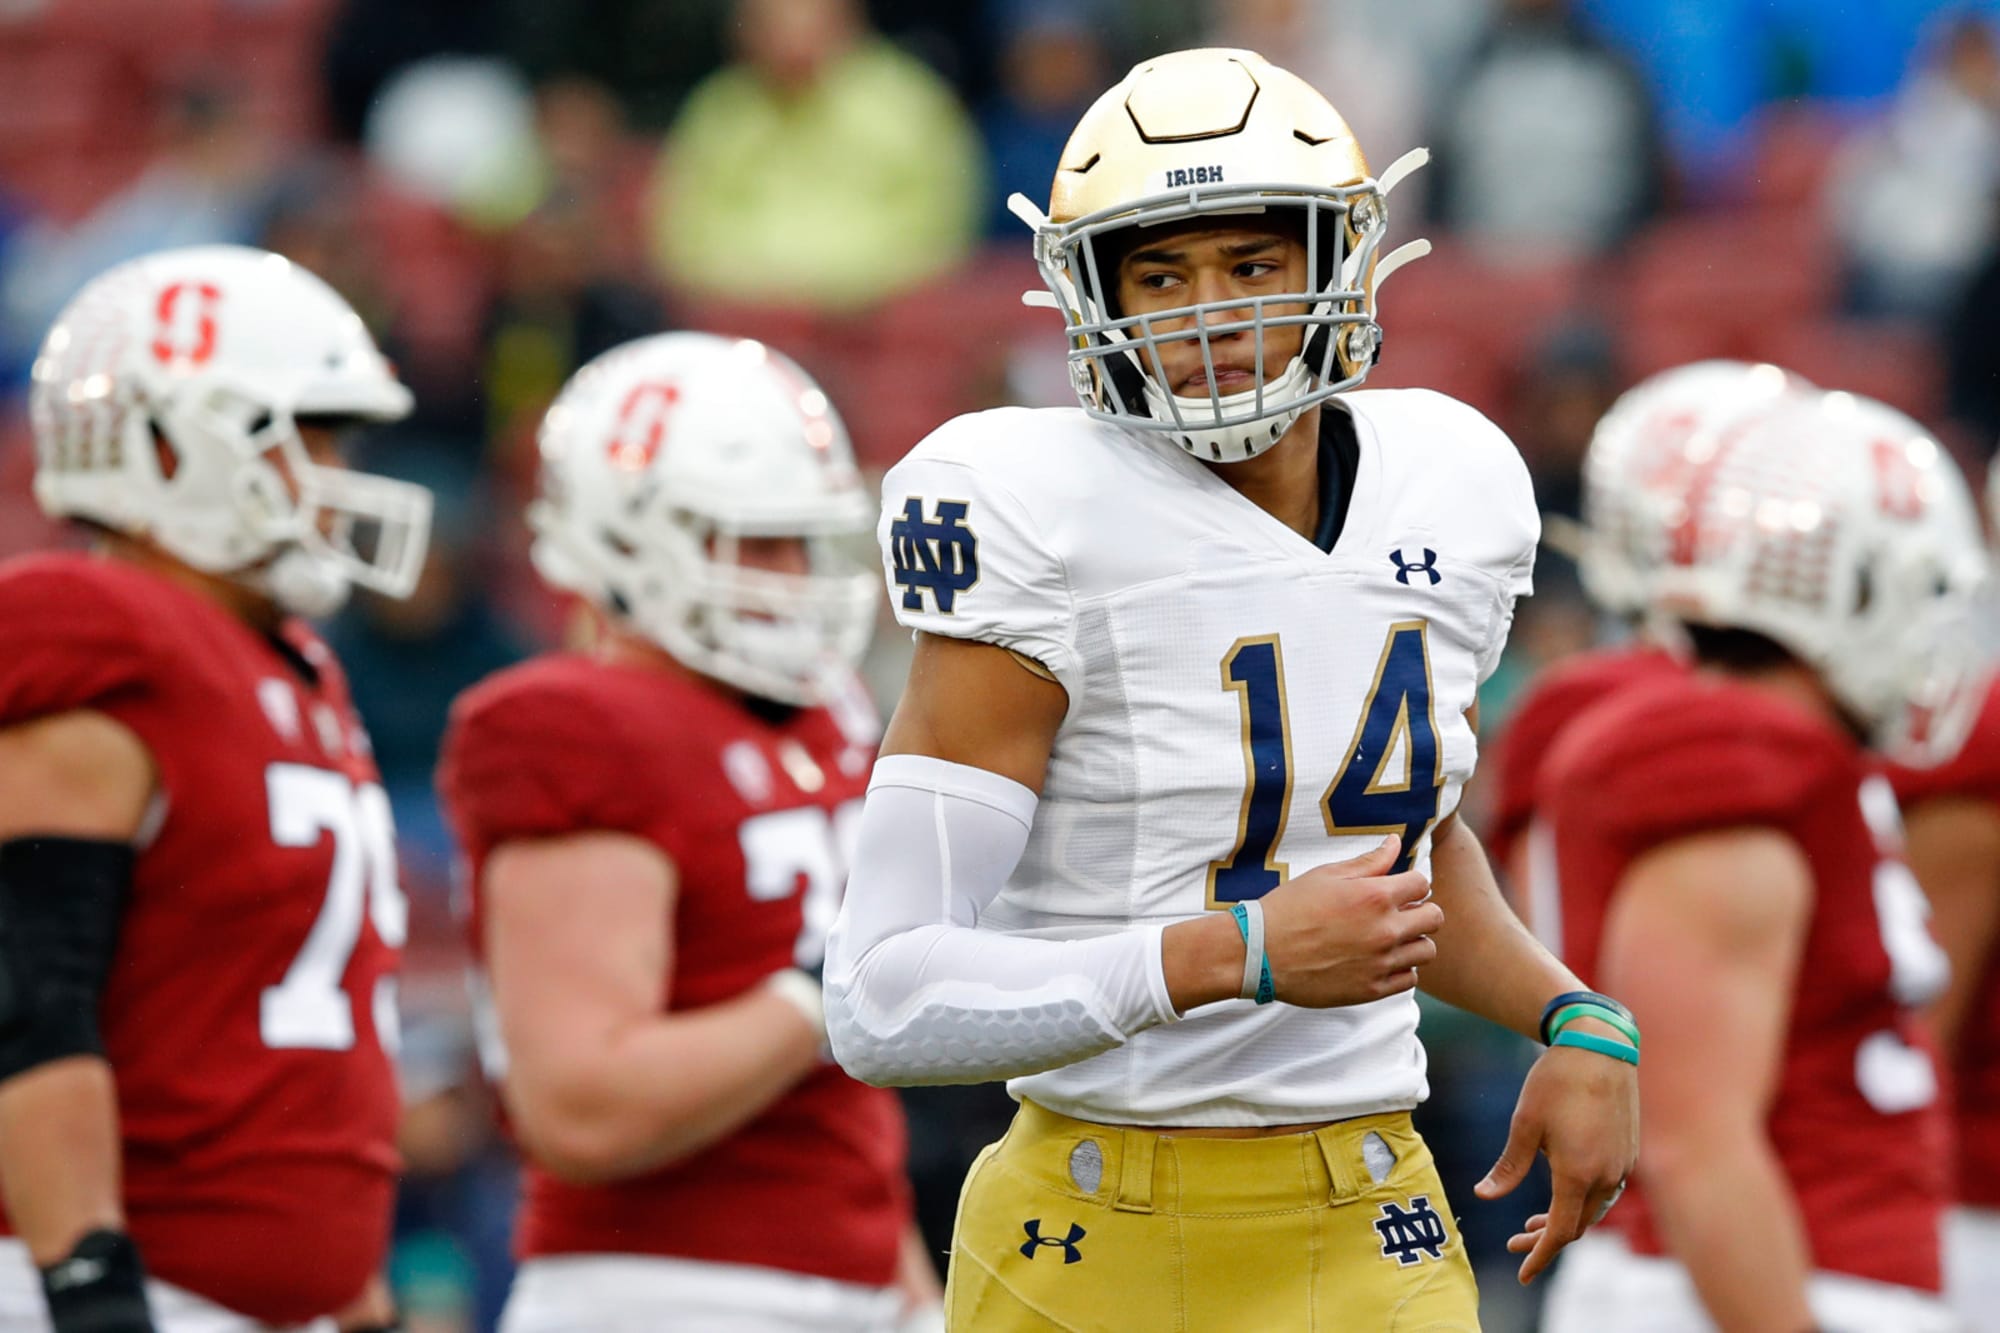 2022 NFL mock draft: Quarterbacks and top defensive prospects go early